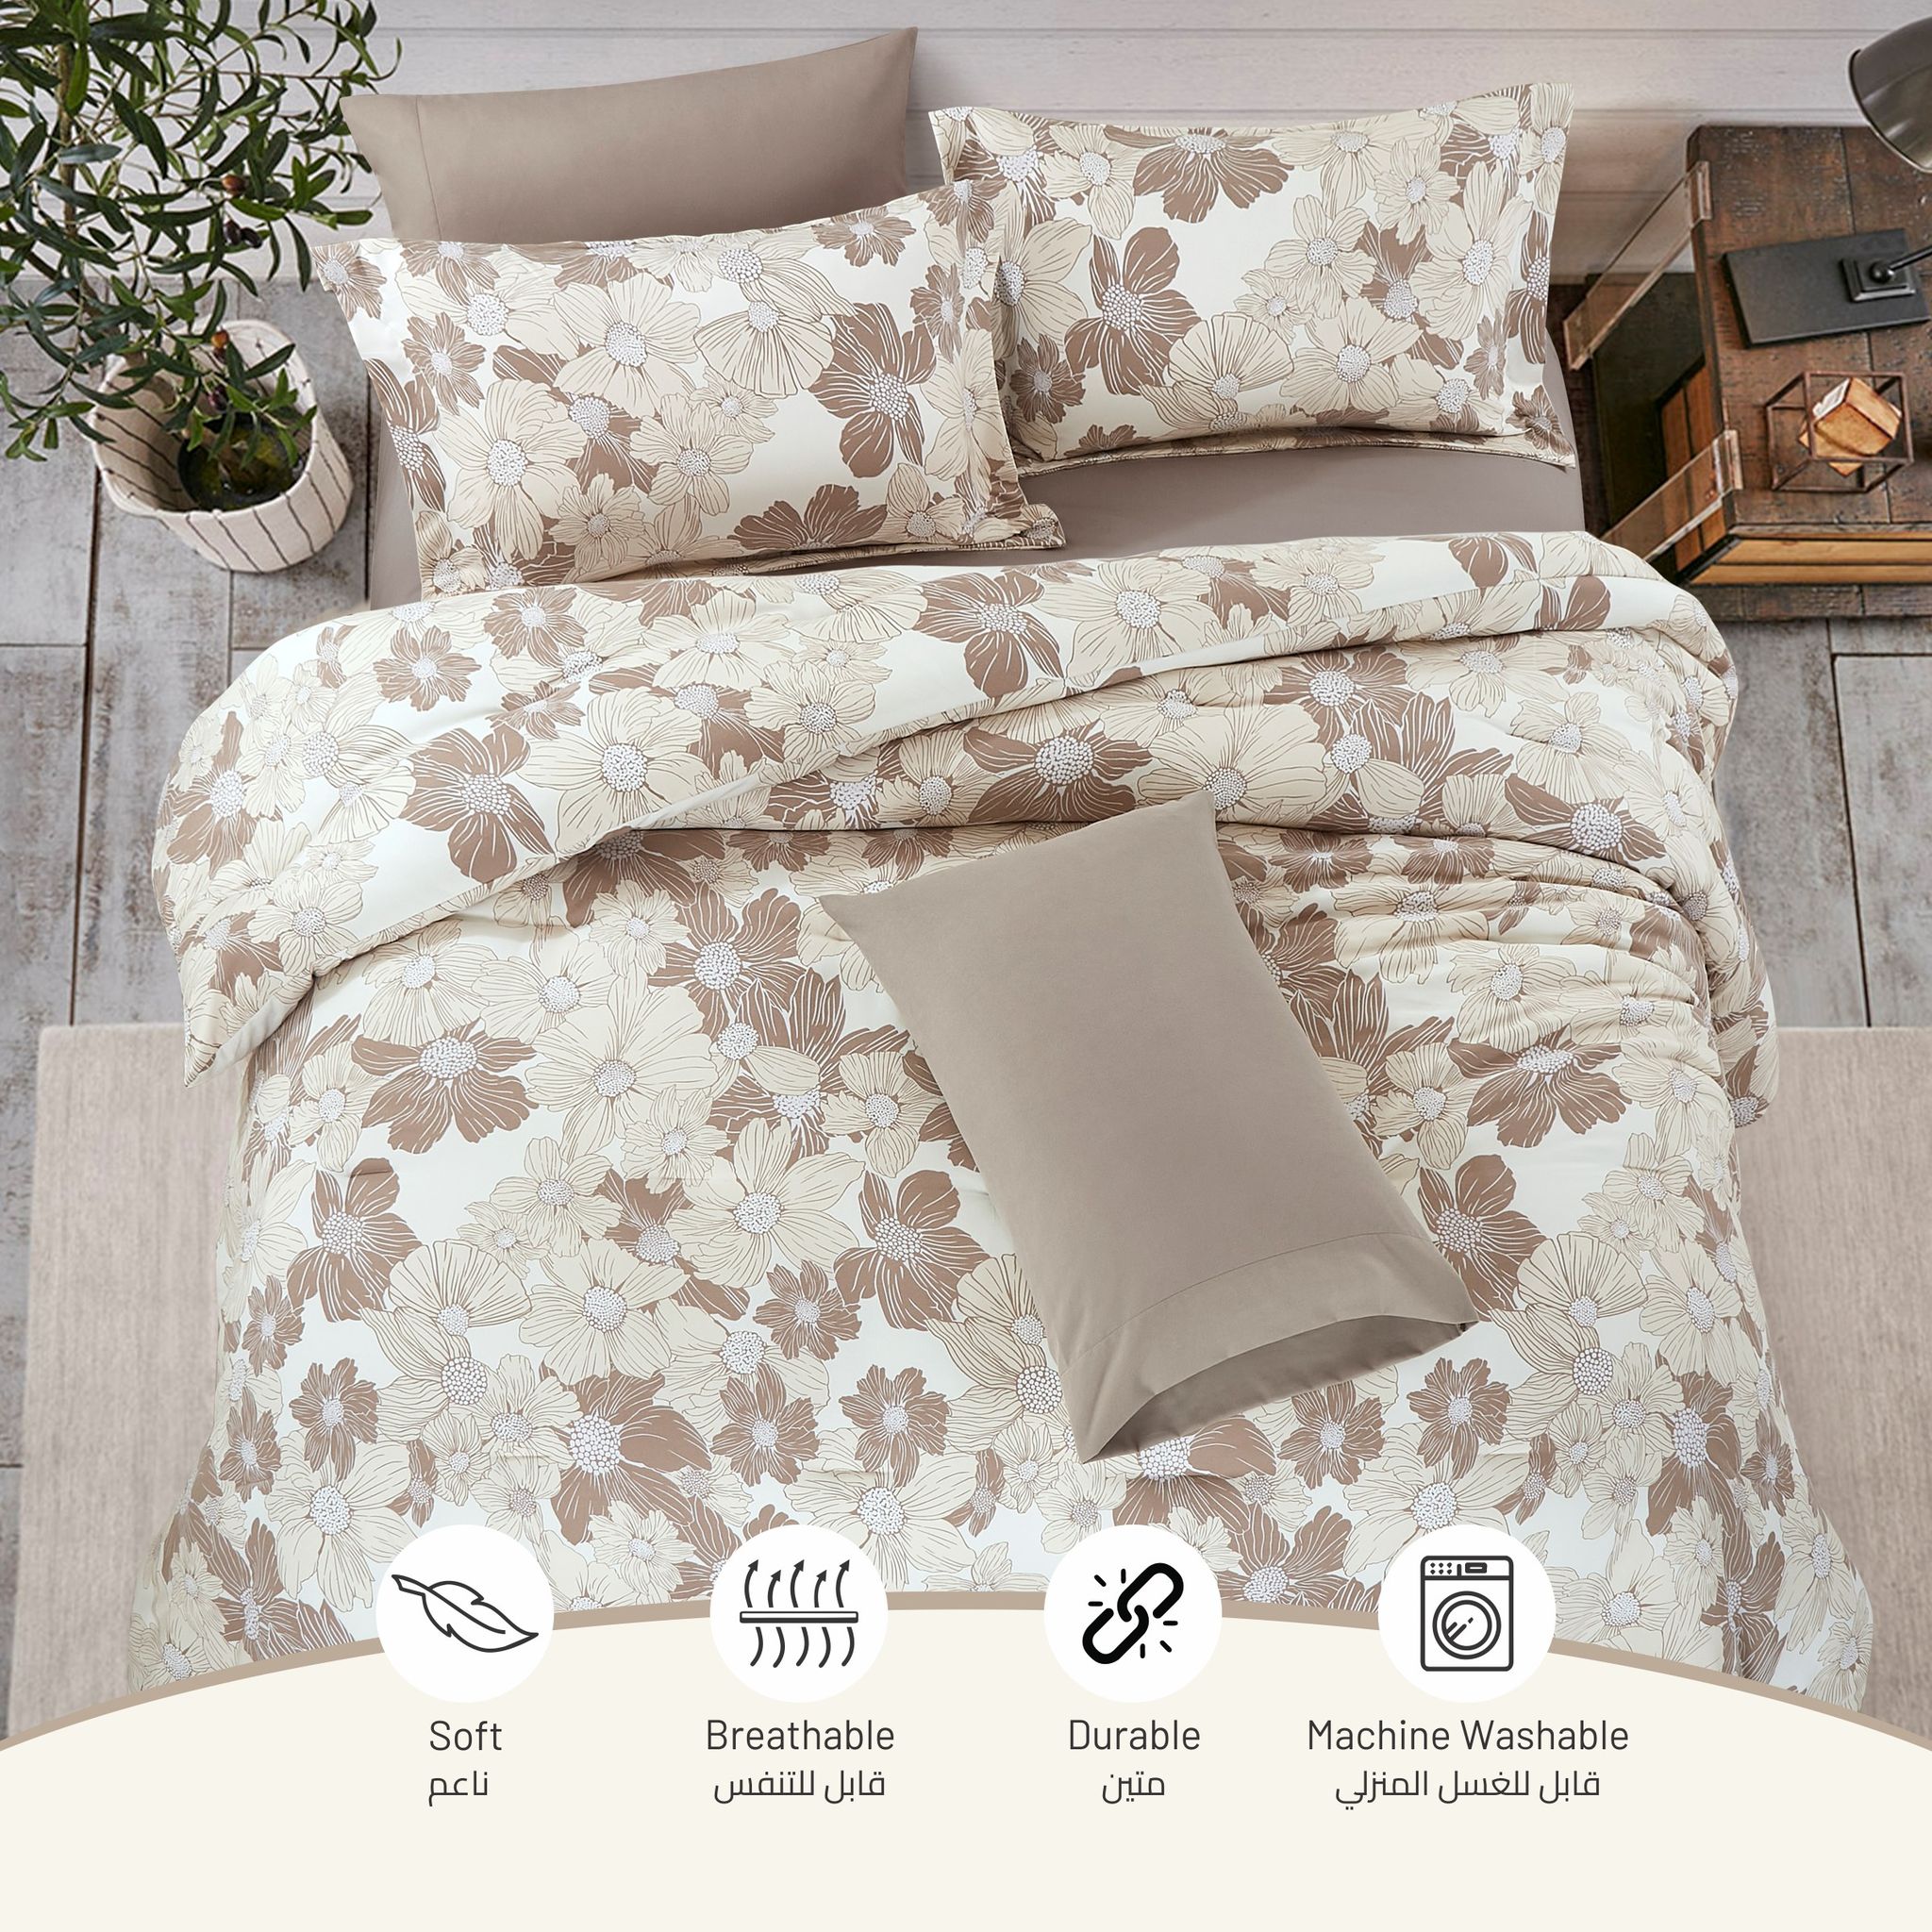 Printed Comforter Set 4-Pcs Twin Size Lightweight All Season Double Bed Bedding Set With Down Alternative Filling,Tan